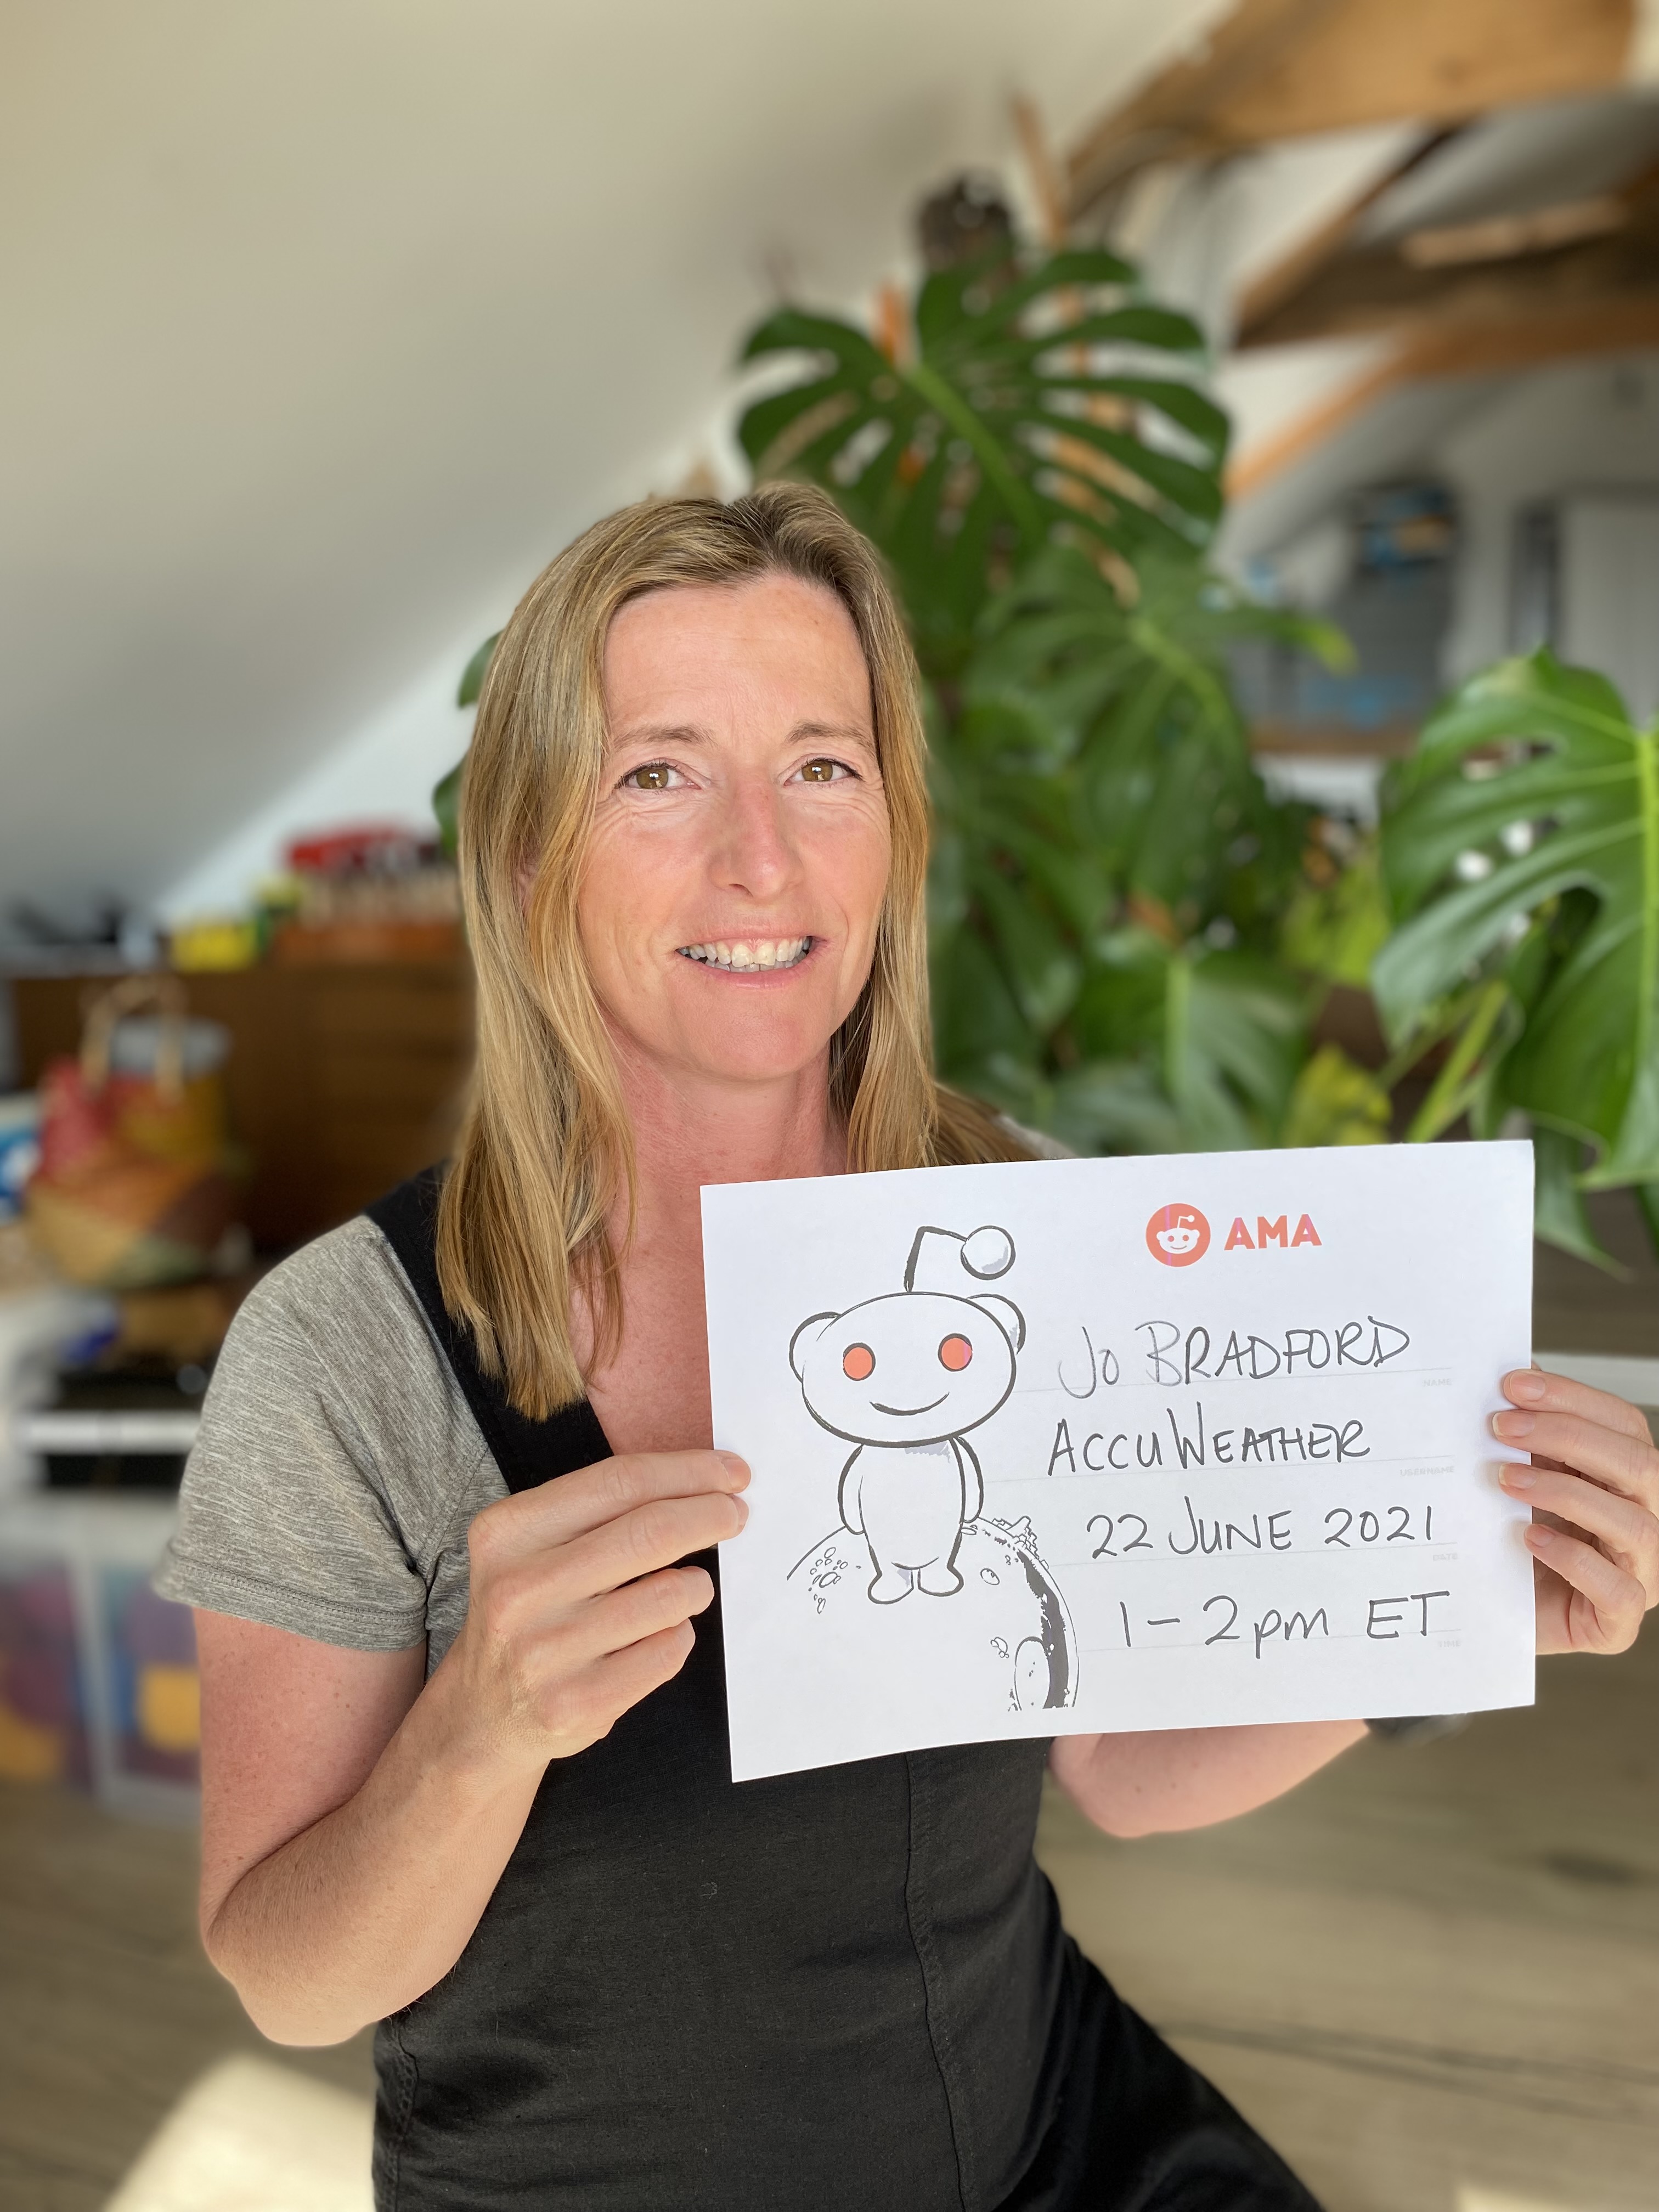 Jo Bradford holding a sign with the time and date of the Reddit event